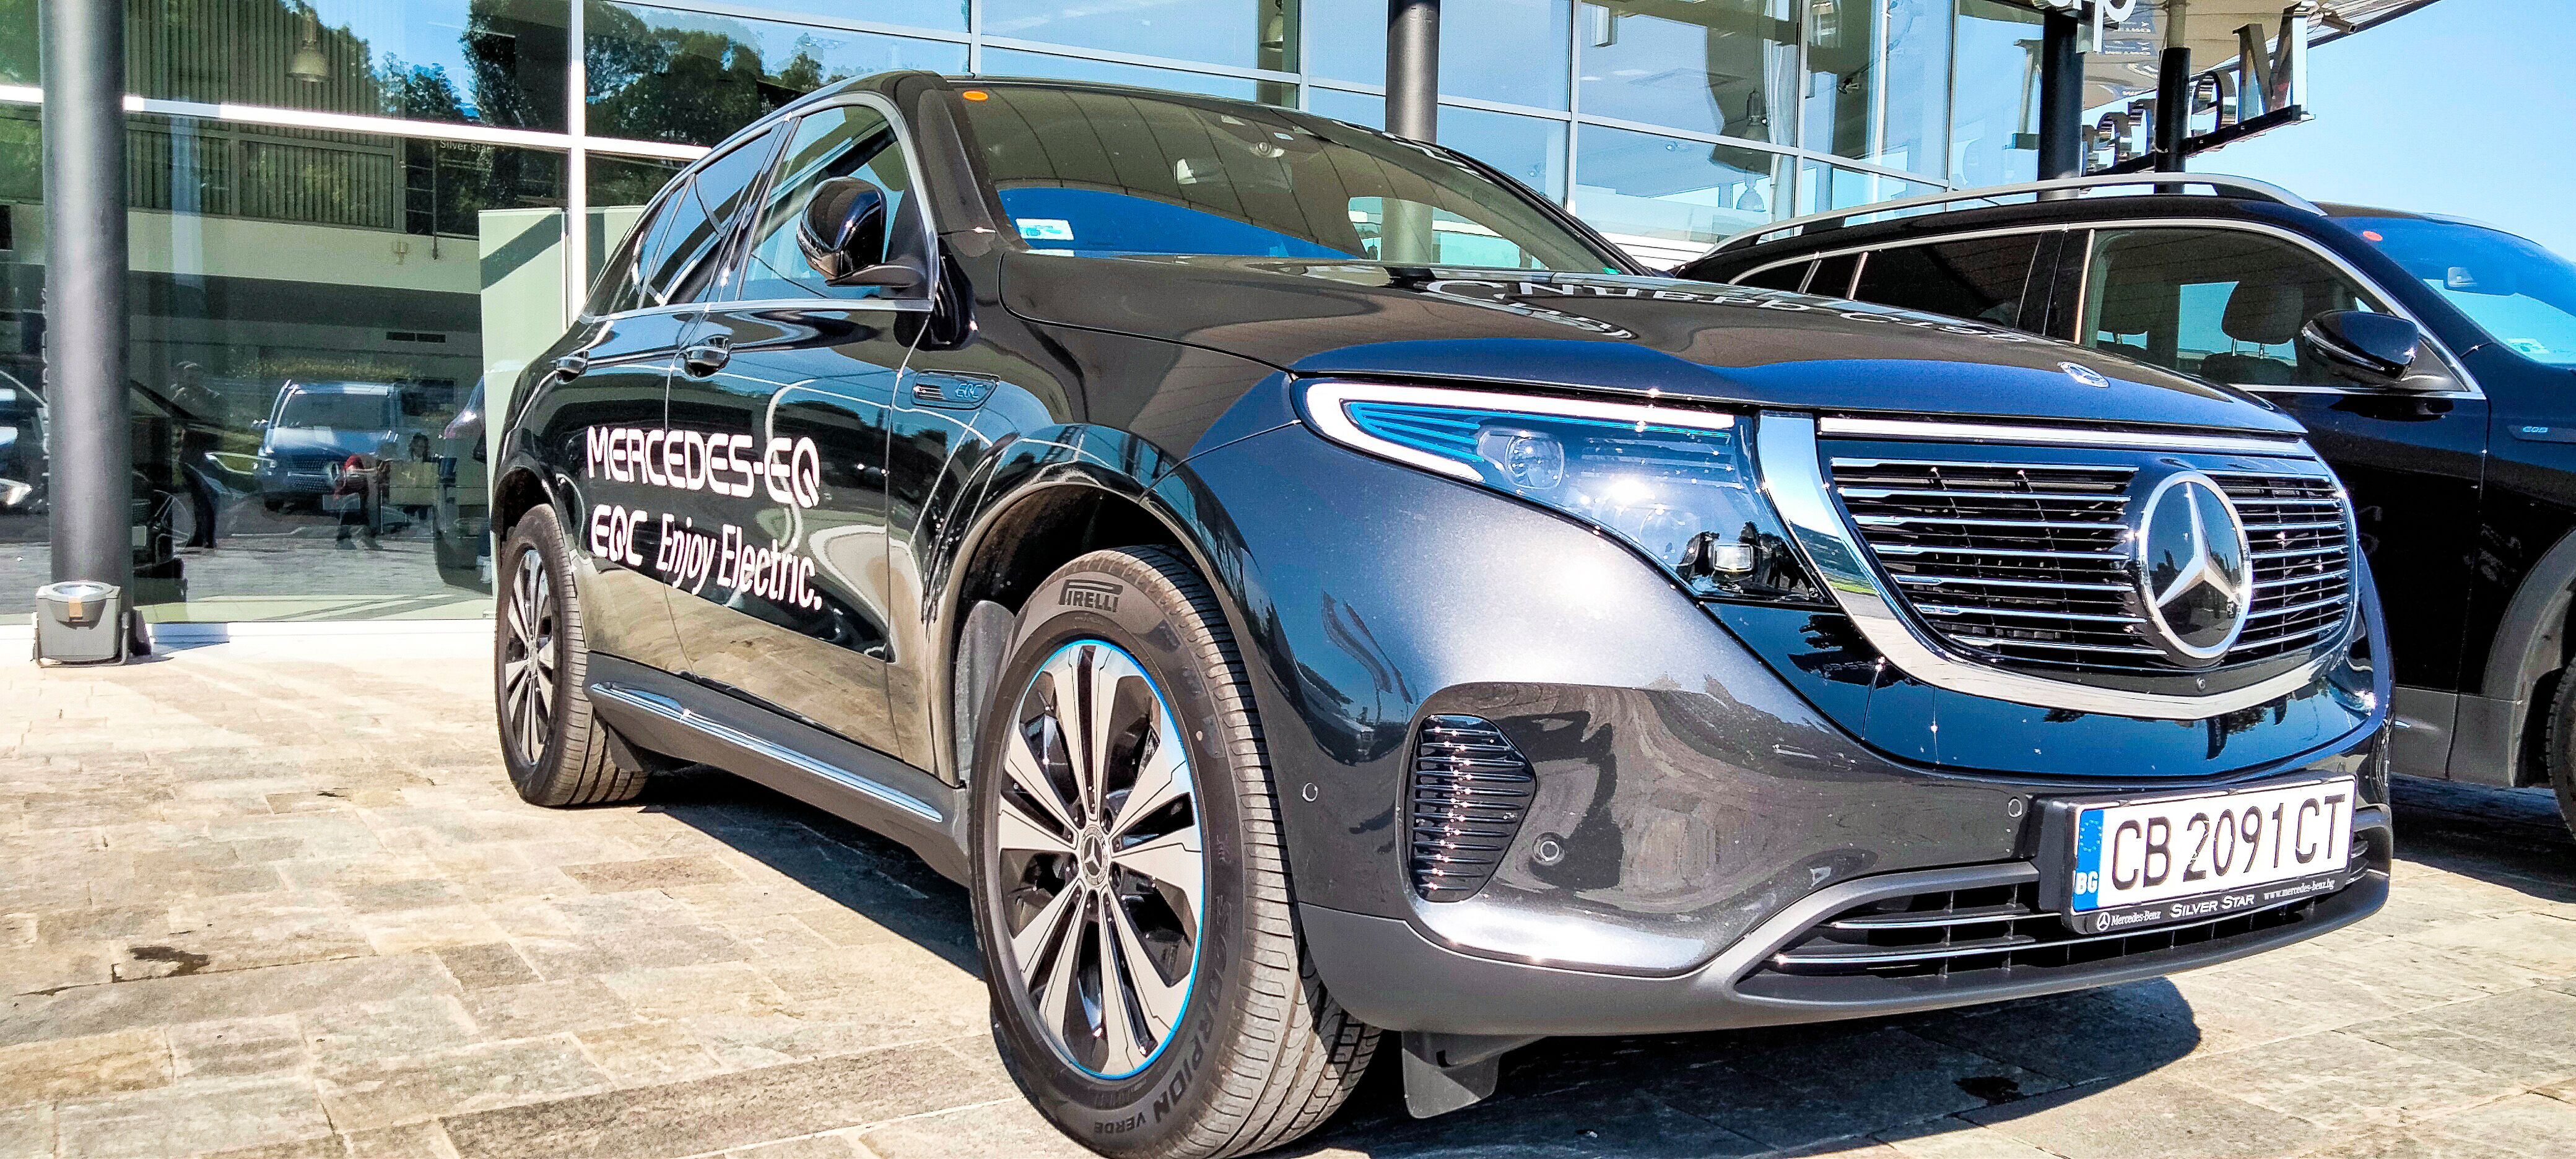 2022 Mercedes EQC 400 Review - The Electric SUV With Hidden Character